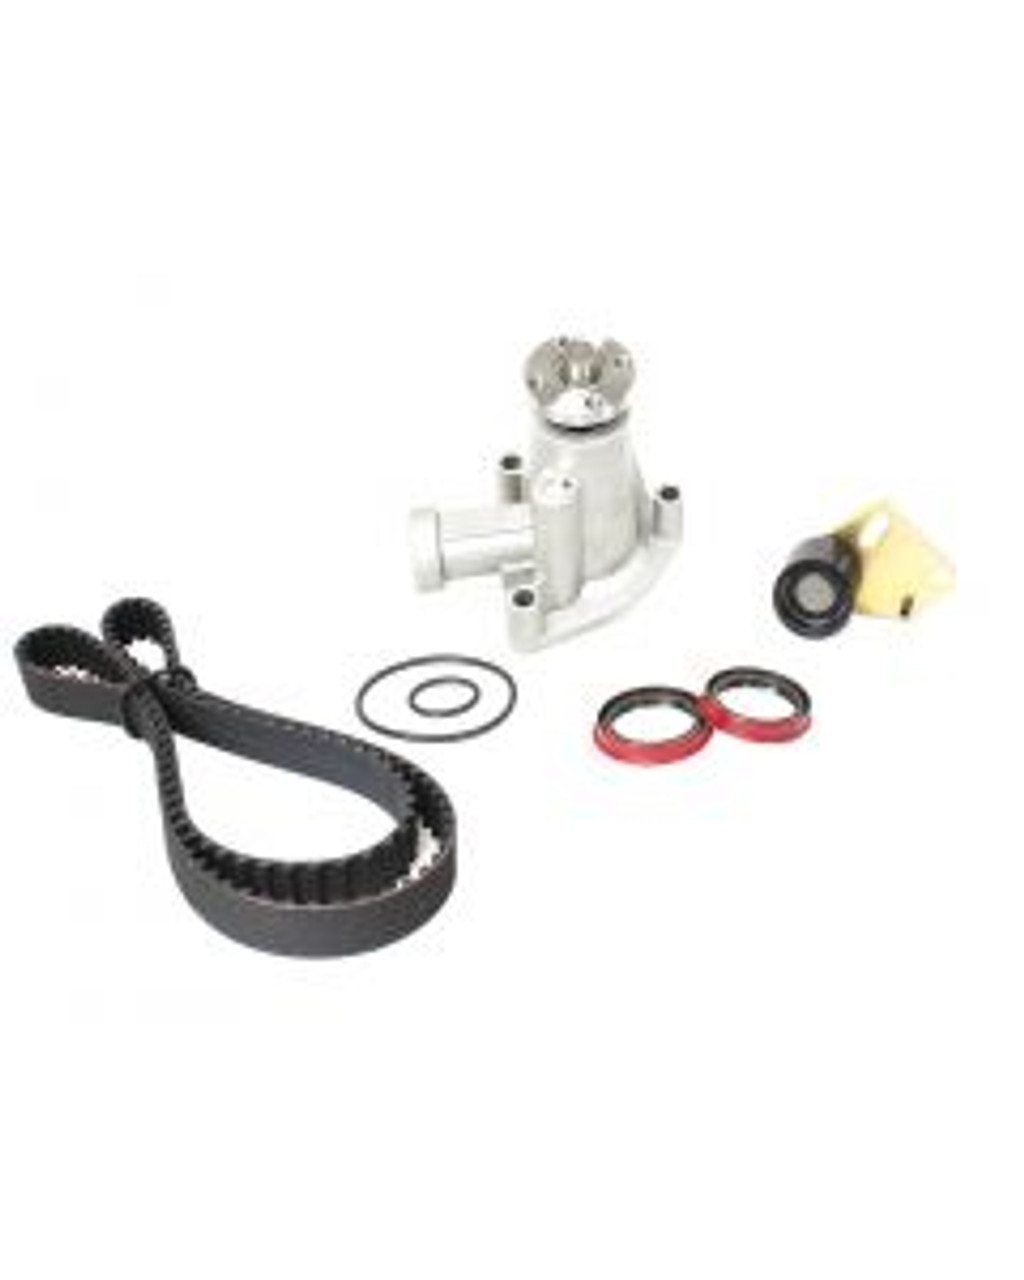 1999 Mazda B2500 2.5L Timing Belt Kit with Water Pump TBK448WP.E12